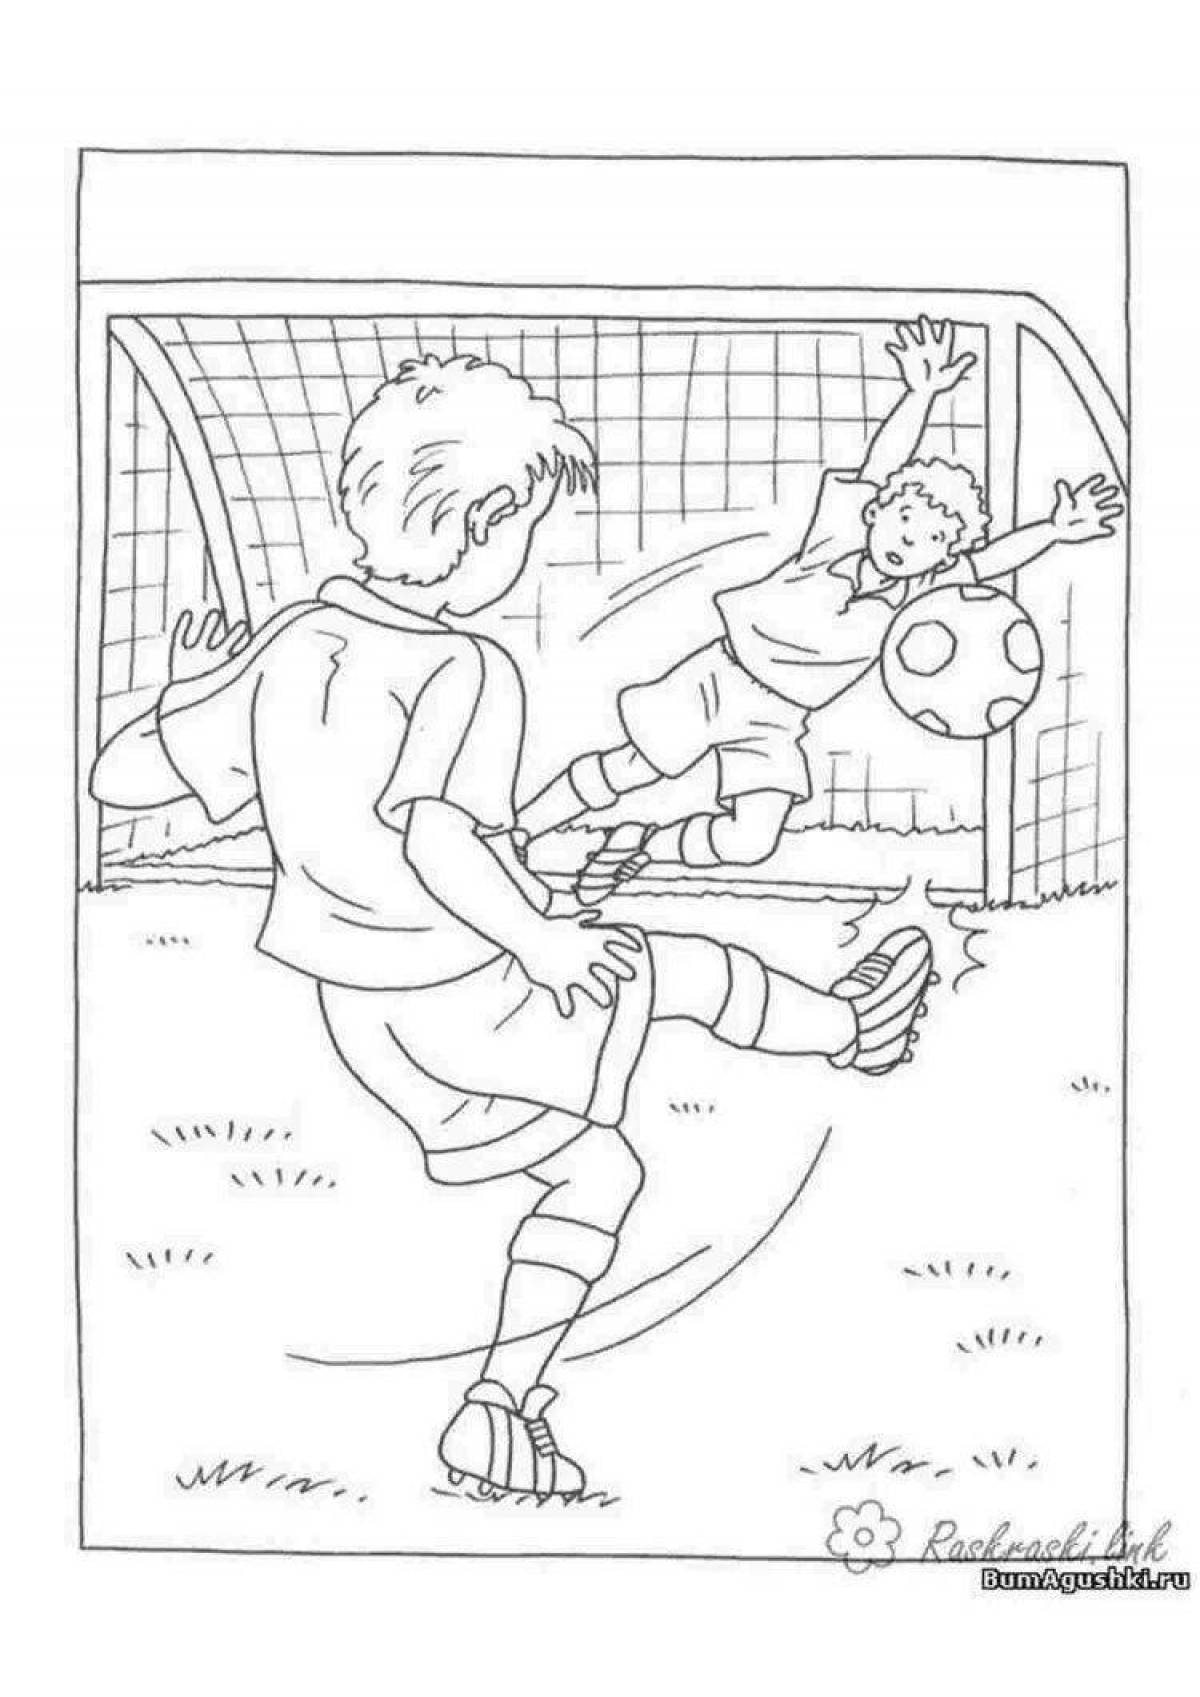 Adorable football coloring book for kids